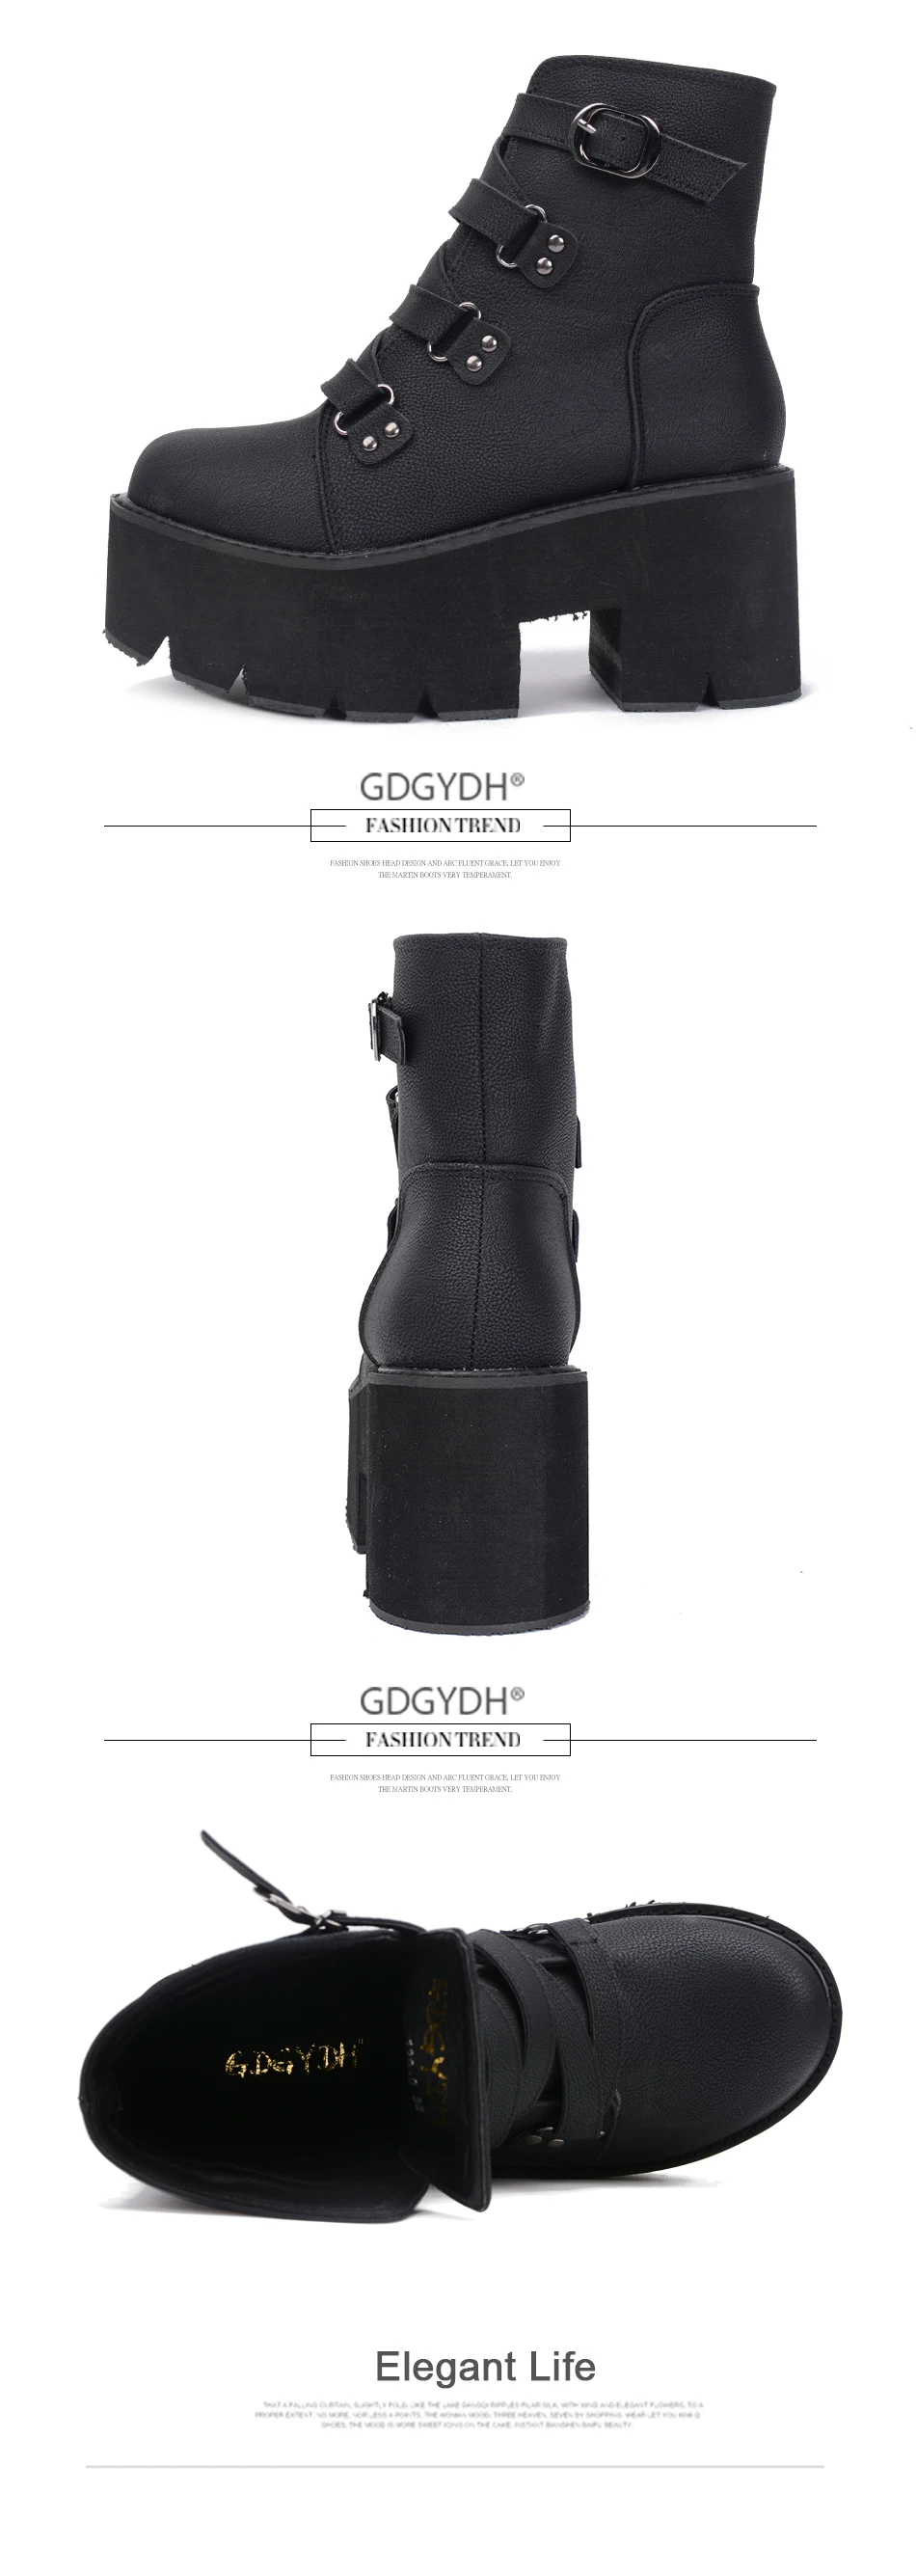 Gdgydh Spring Autumn Ankle Boots Women Platform Boots Rubber Sole Buckle Black Leather PU High Heels Shoes Woman Comfortable